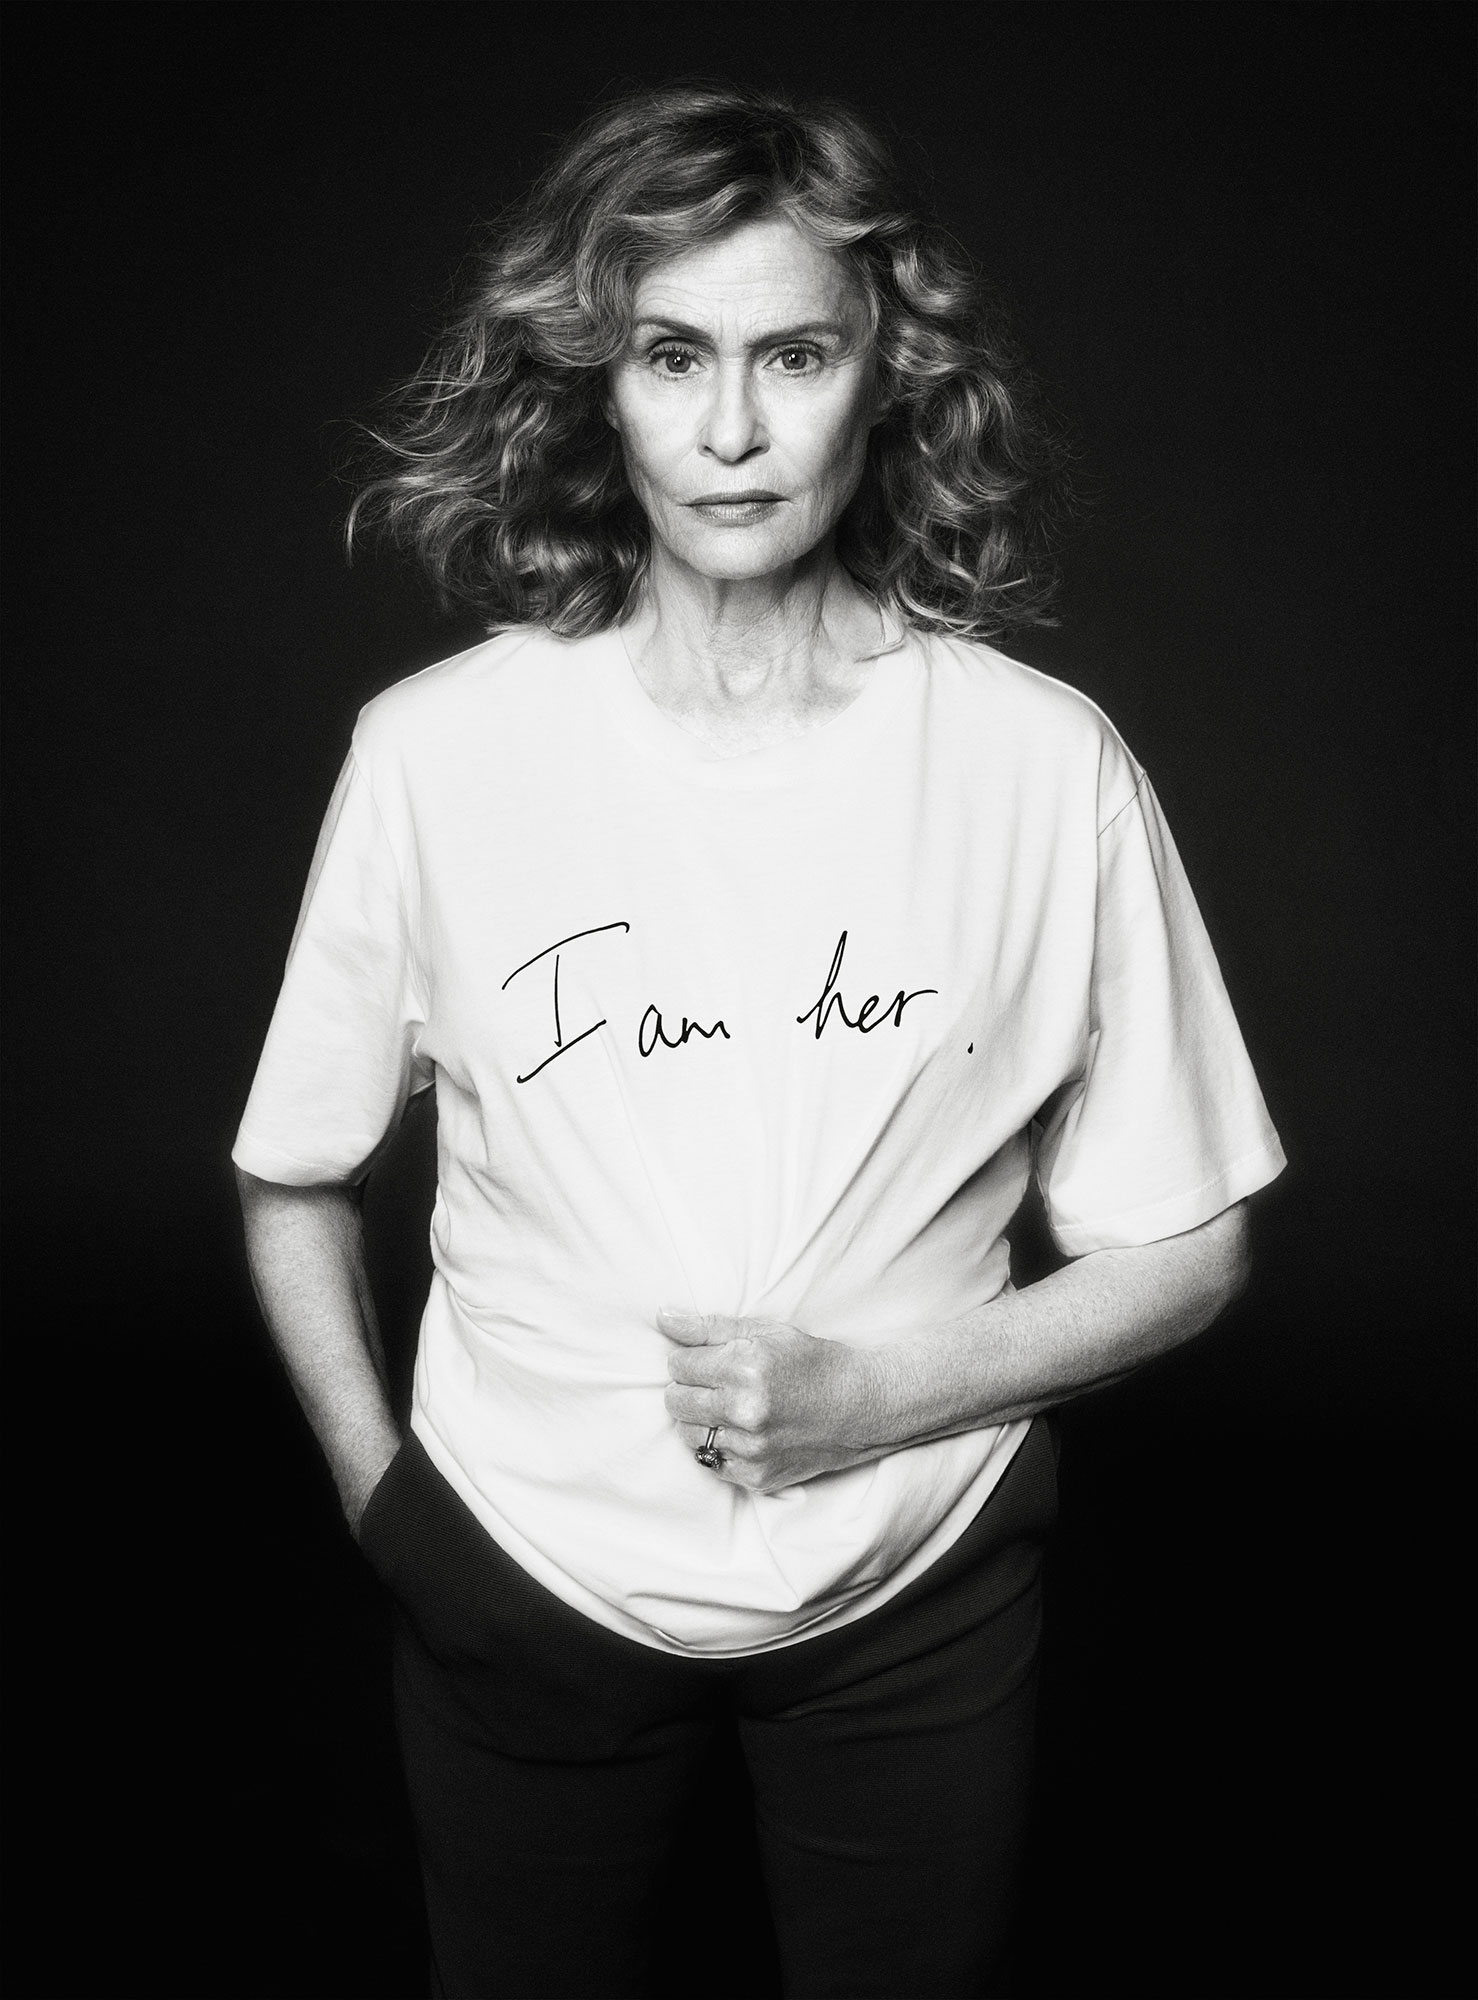 Lauren Hutton Net-a-Porter Is Here With a Star-Studded T-Shirt Collection for International Women's Day